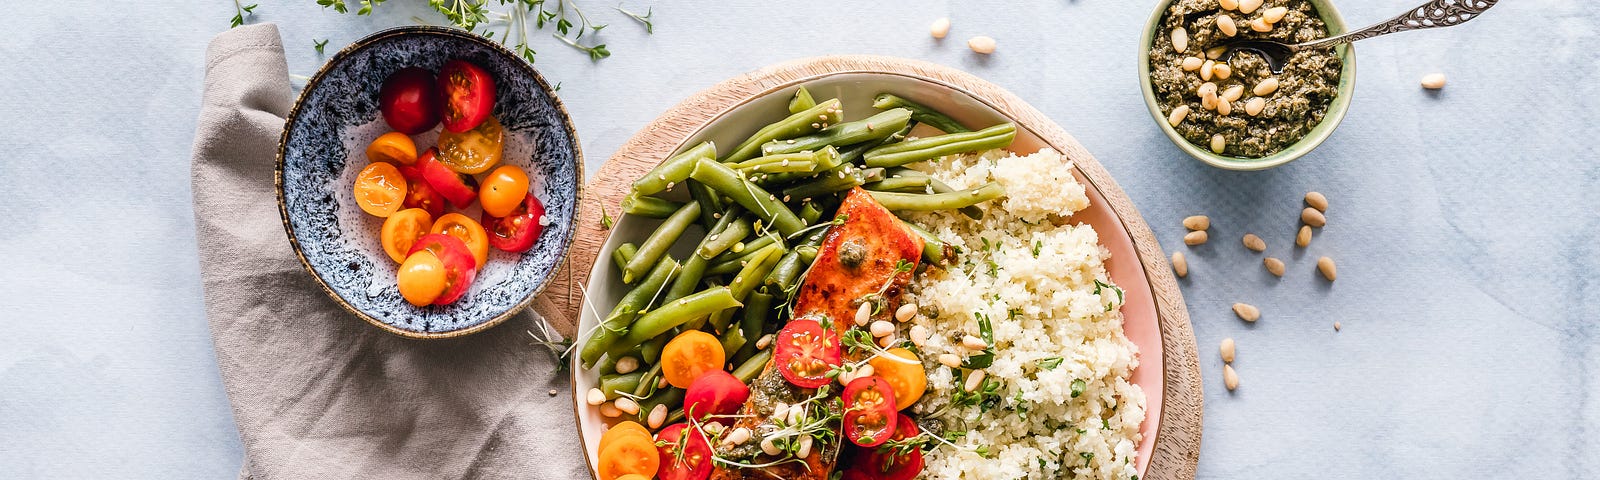 A bowl of green beans, tomatoes, and rice, on a wooden board.